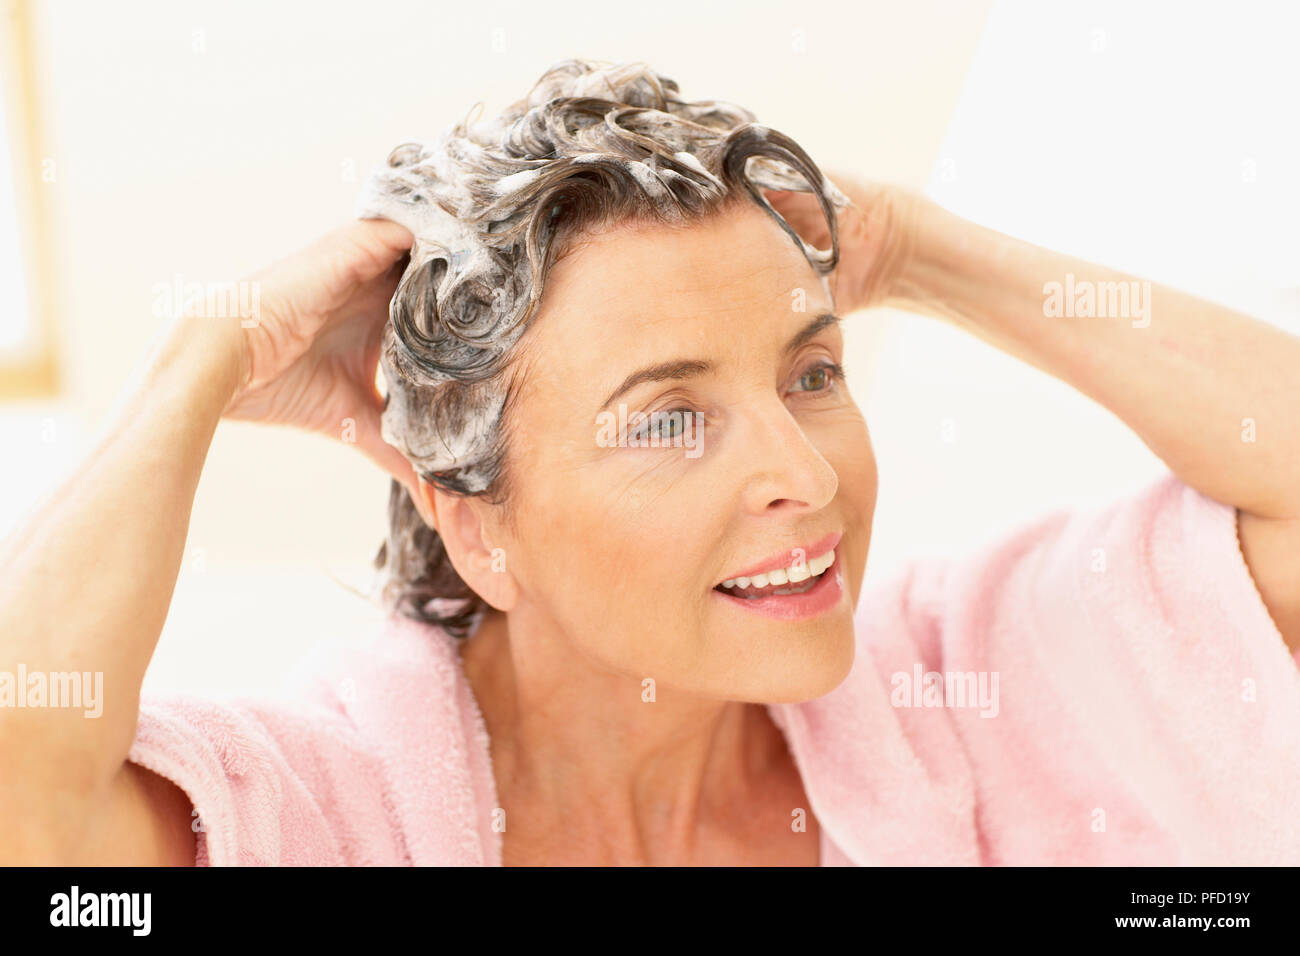 Woman smiling with eyes open, head and shoulders, in pink towelling robe, lathering hair with hands Stock Photo